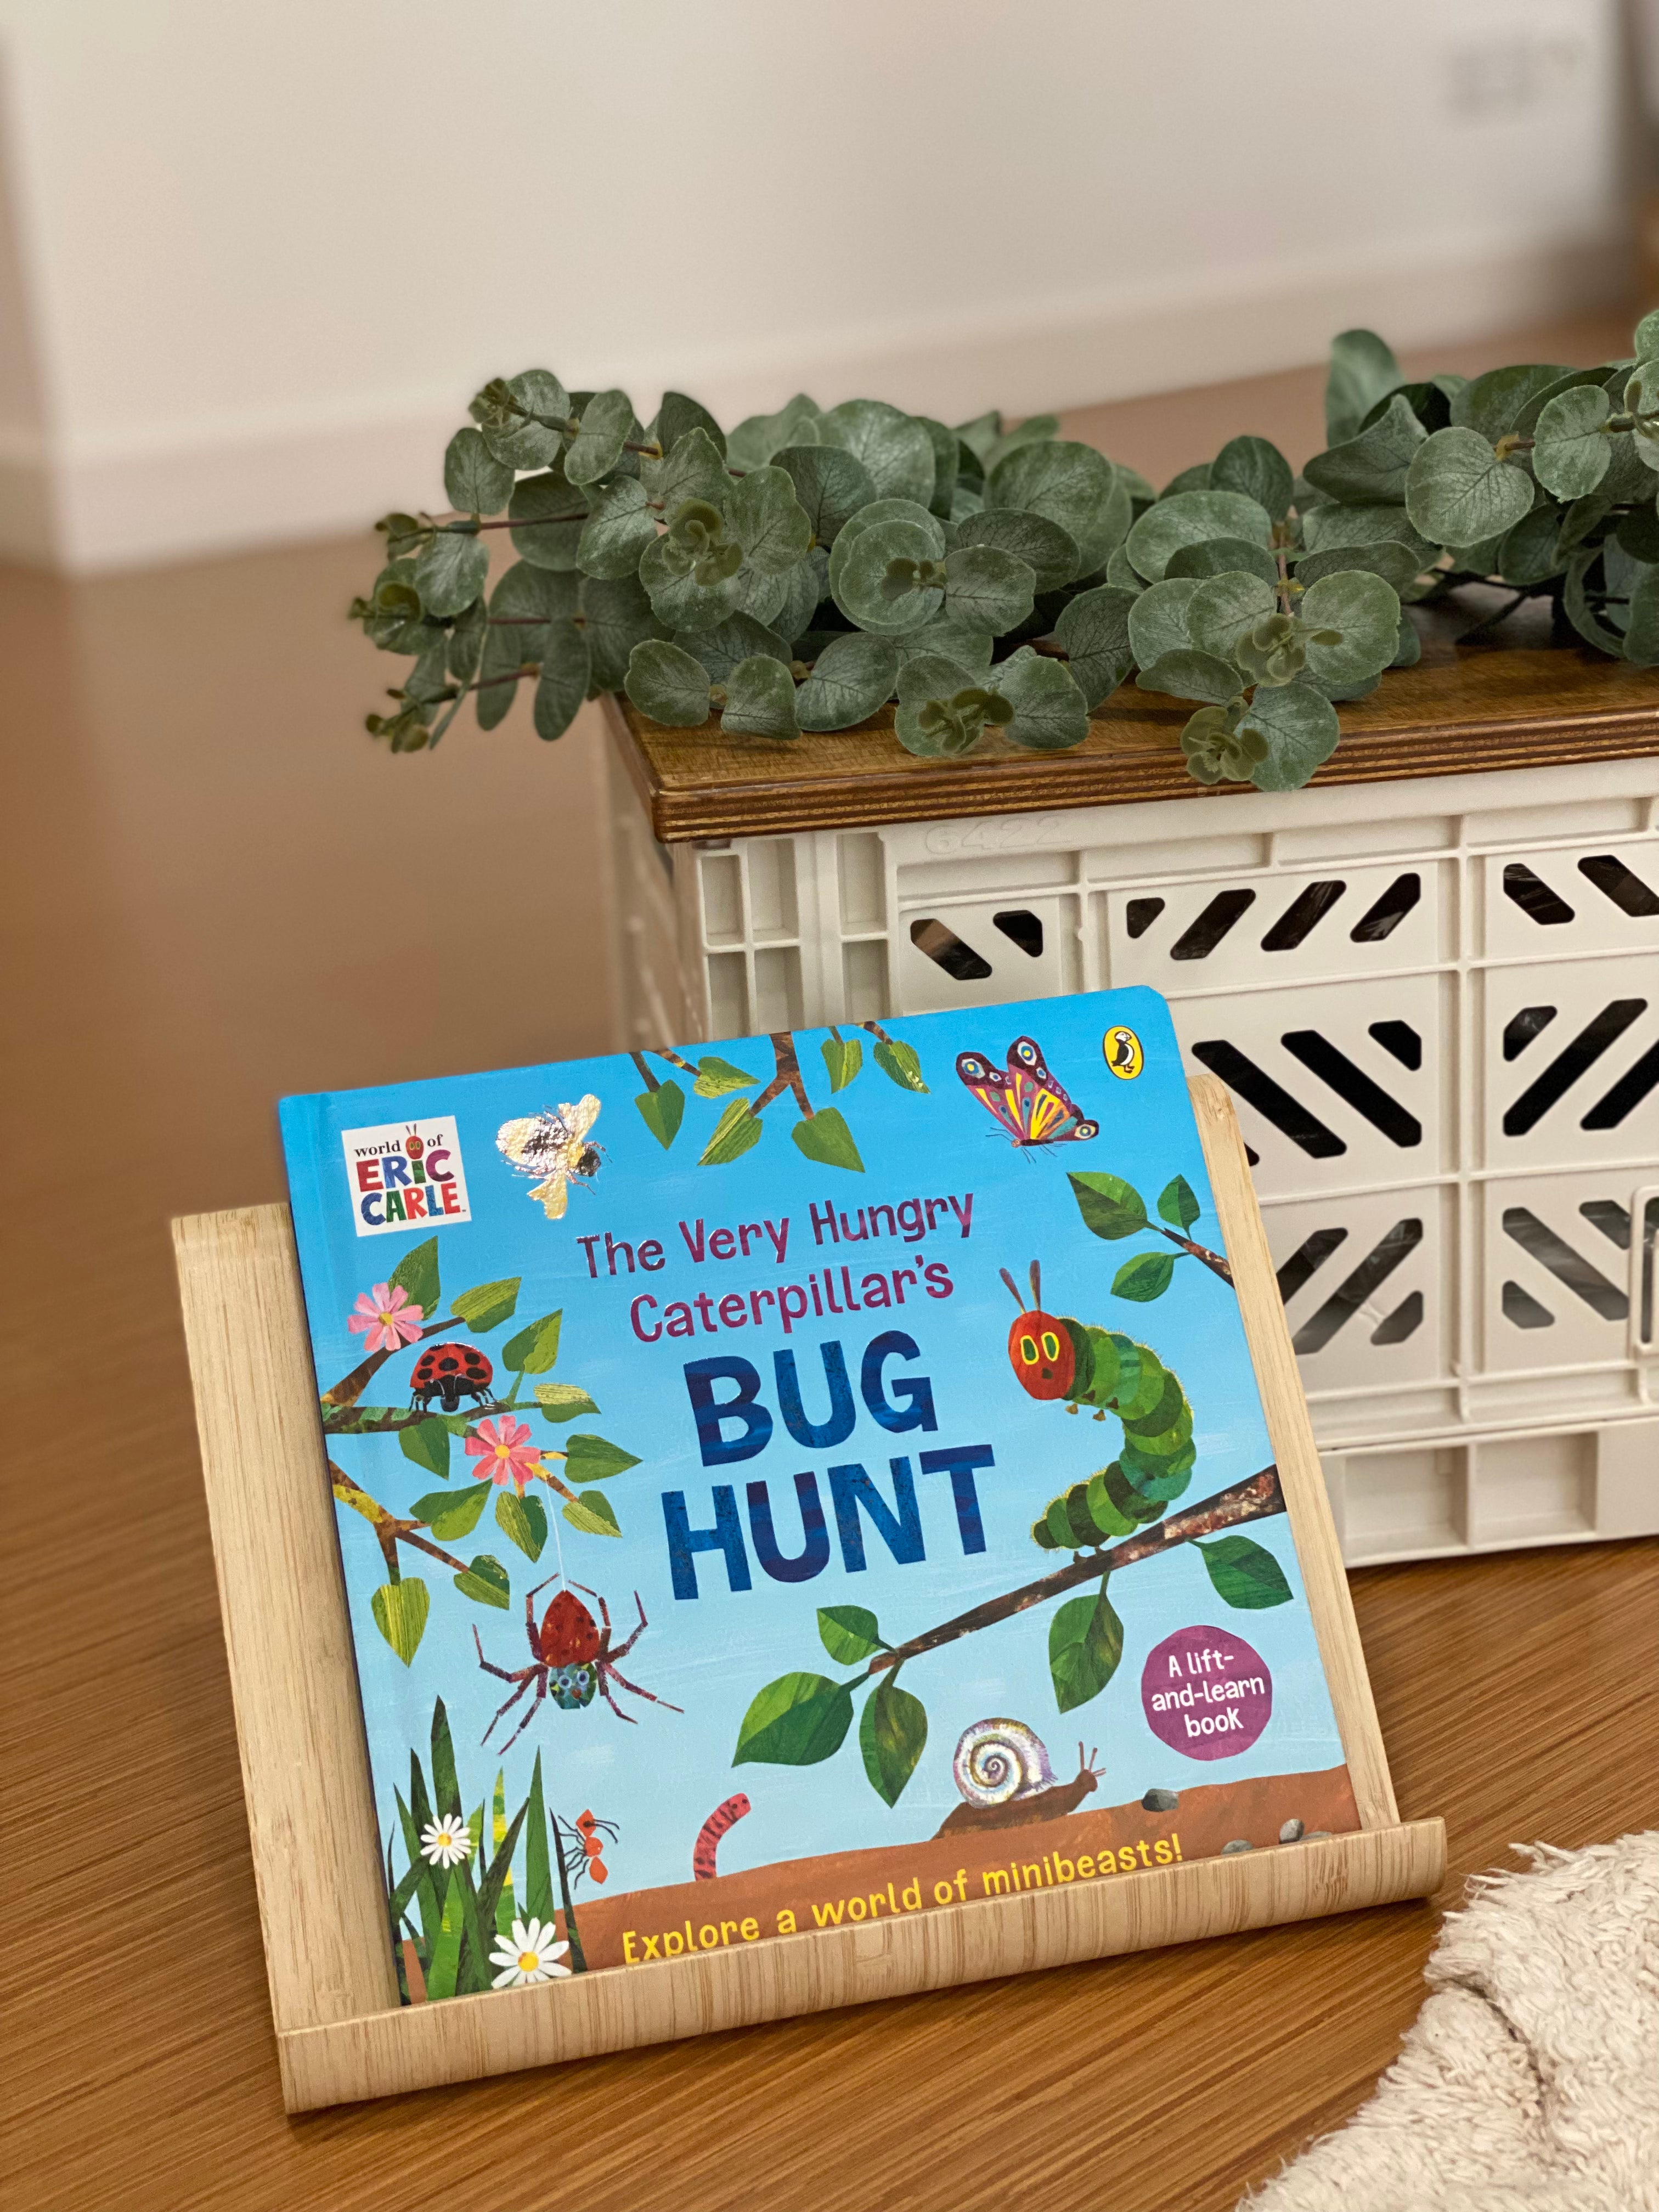 The Very Hungry Caterpillar's Bug Hunt